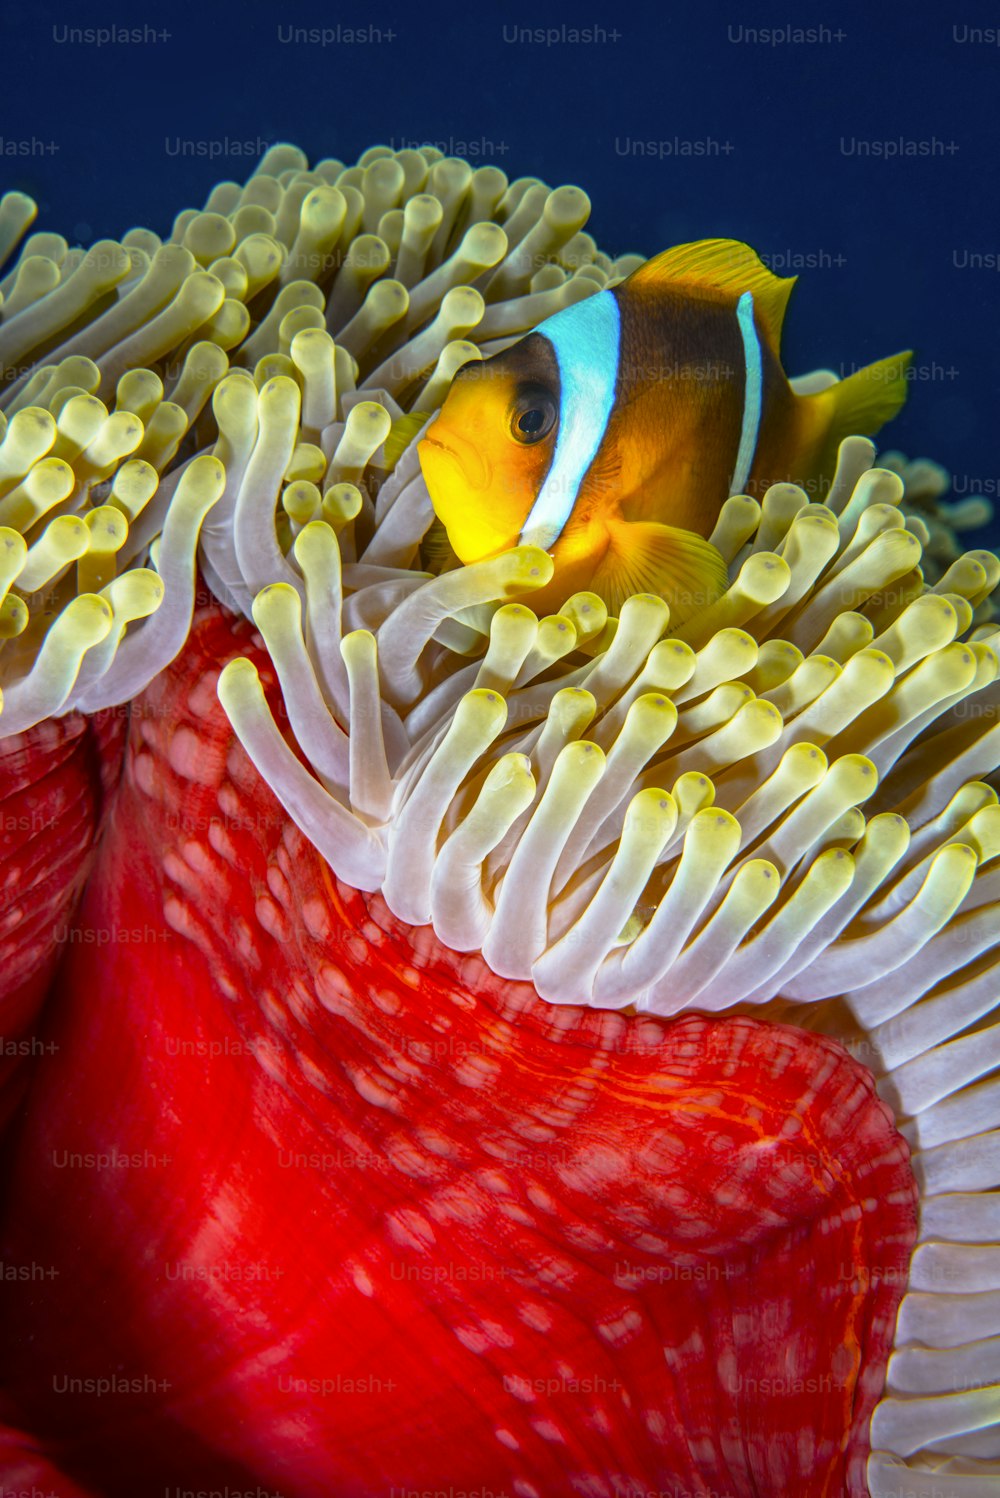 An anemone fish in Redsea